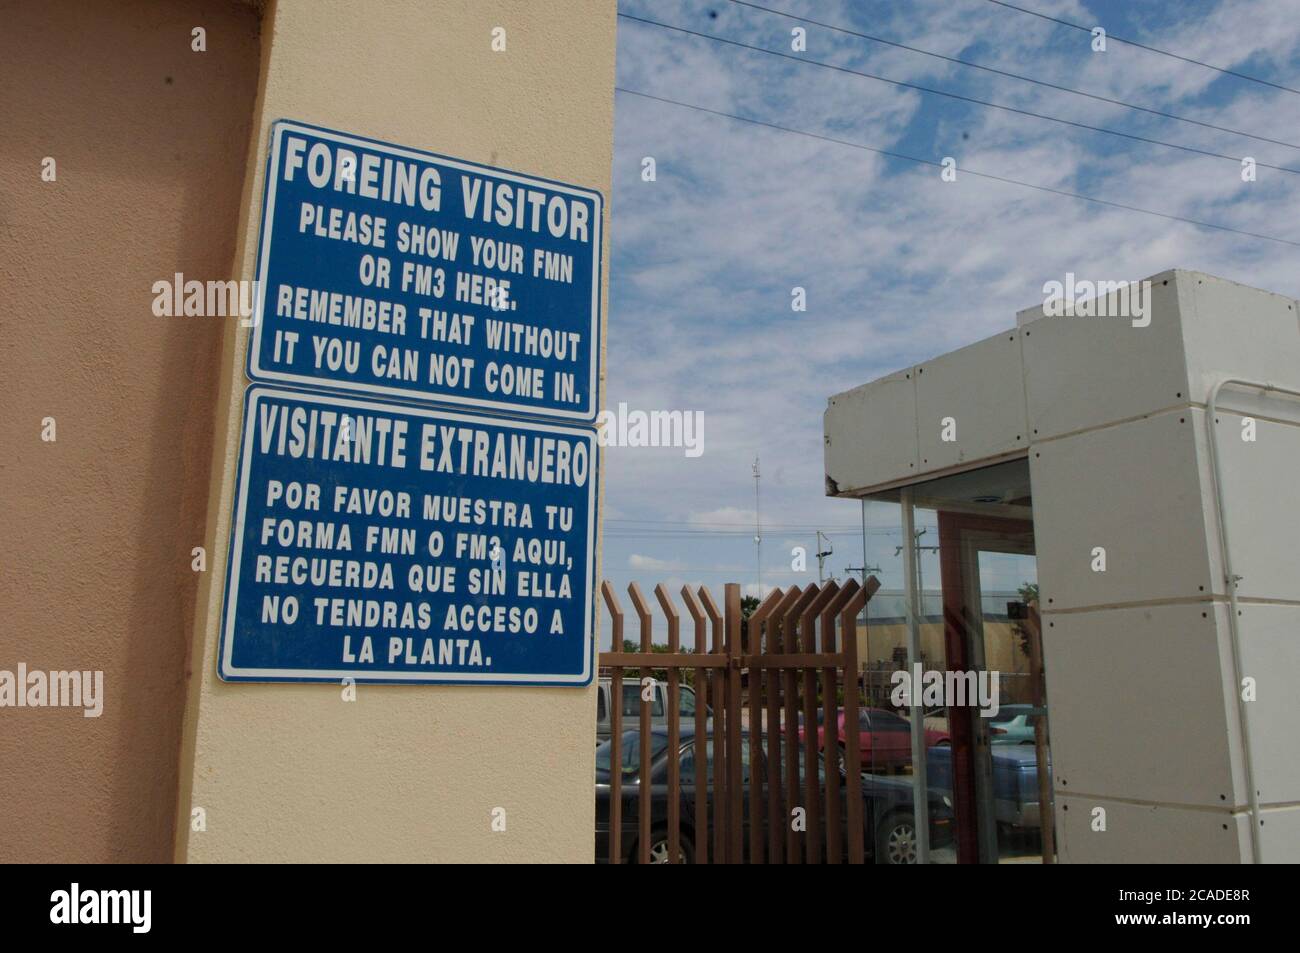 Matamoros, Mexico April, 2006: Bilingual signs outside a maquiladora manufacturing plant across the United States border from Brownsville, Texas.  ©Bob Daemmrich Stock Photo